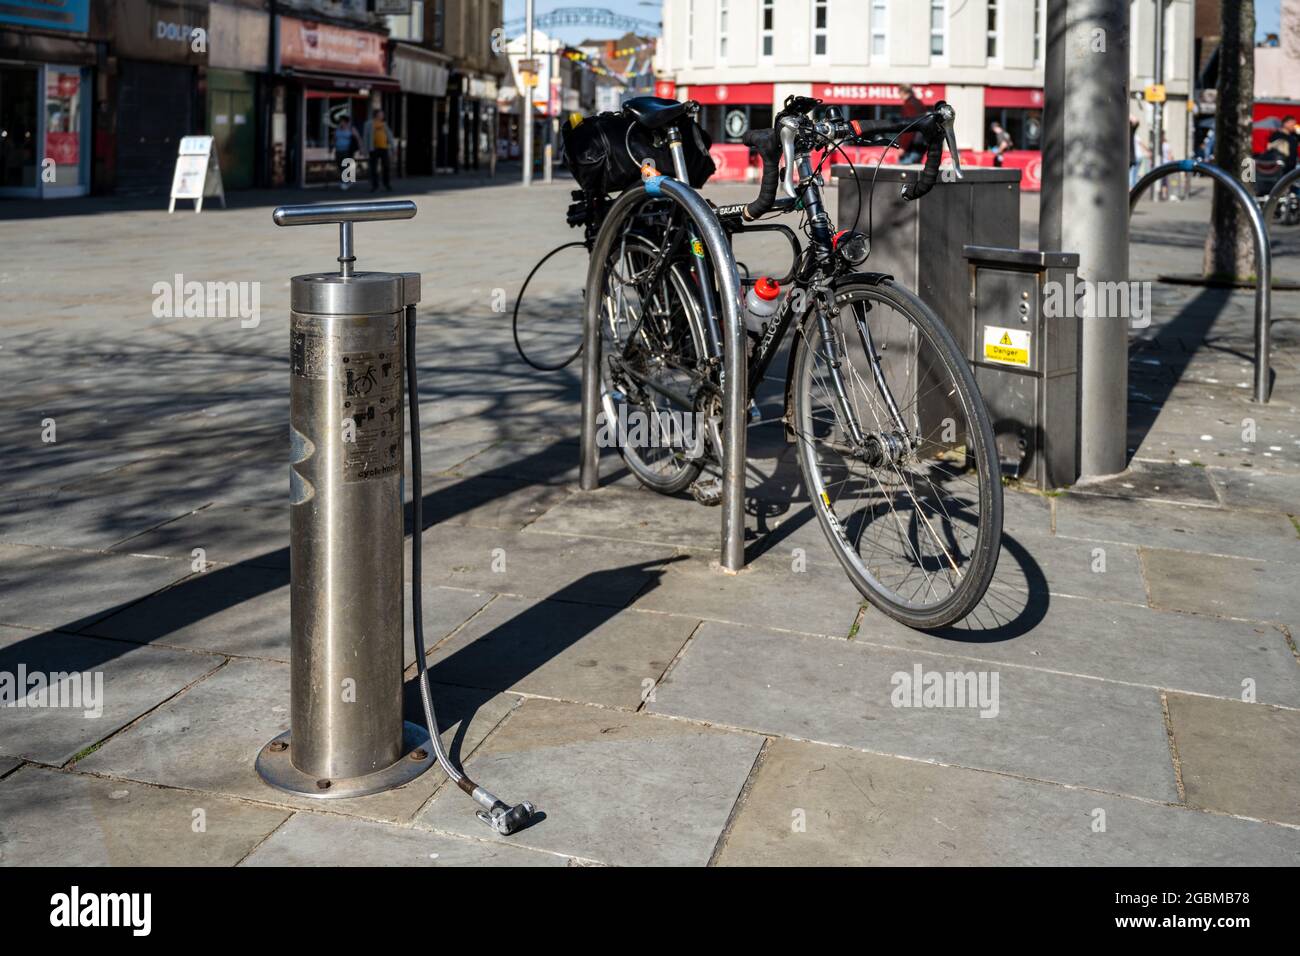 Public Bike High Resolution Stock Photography and - Alamy